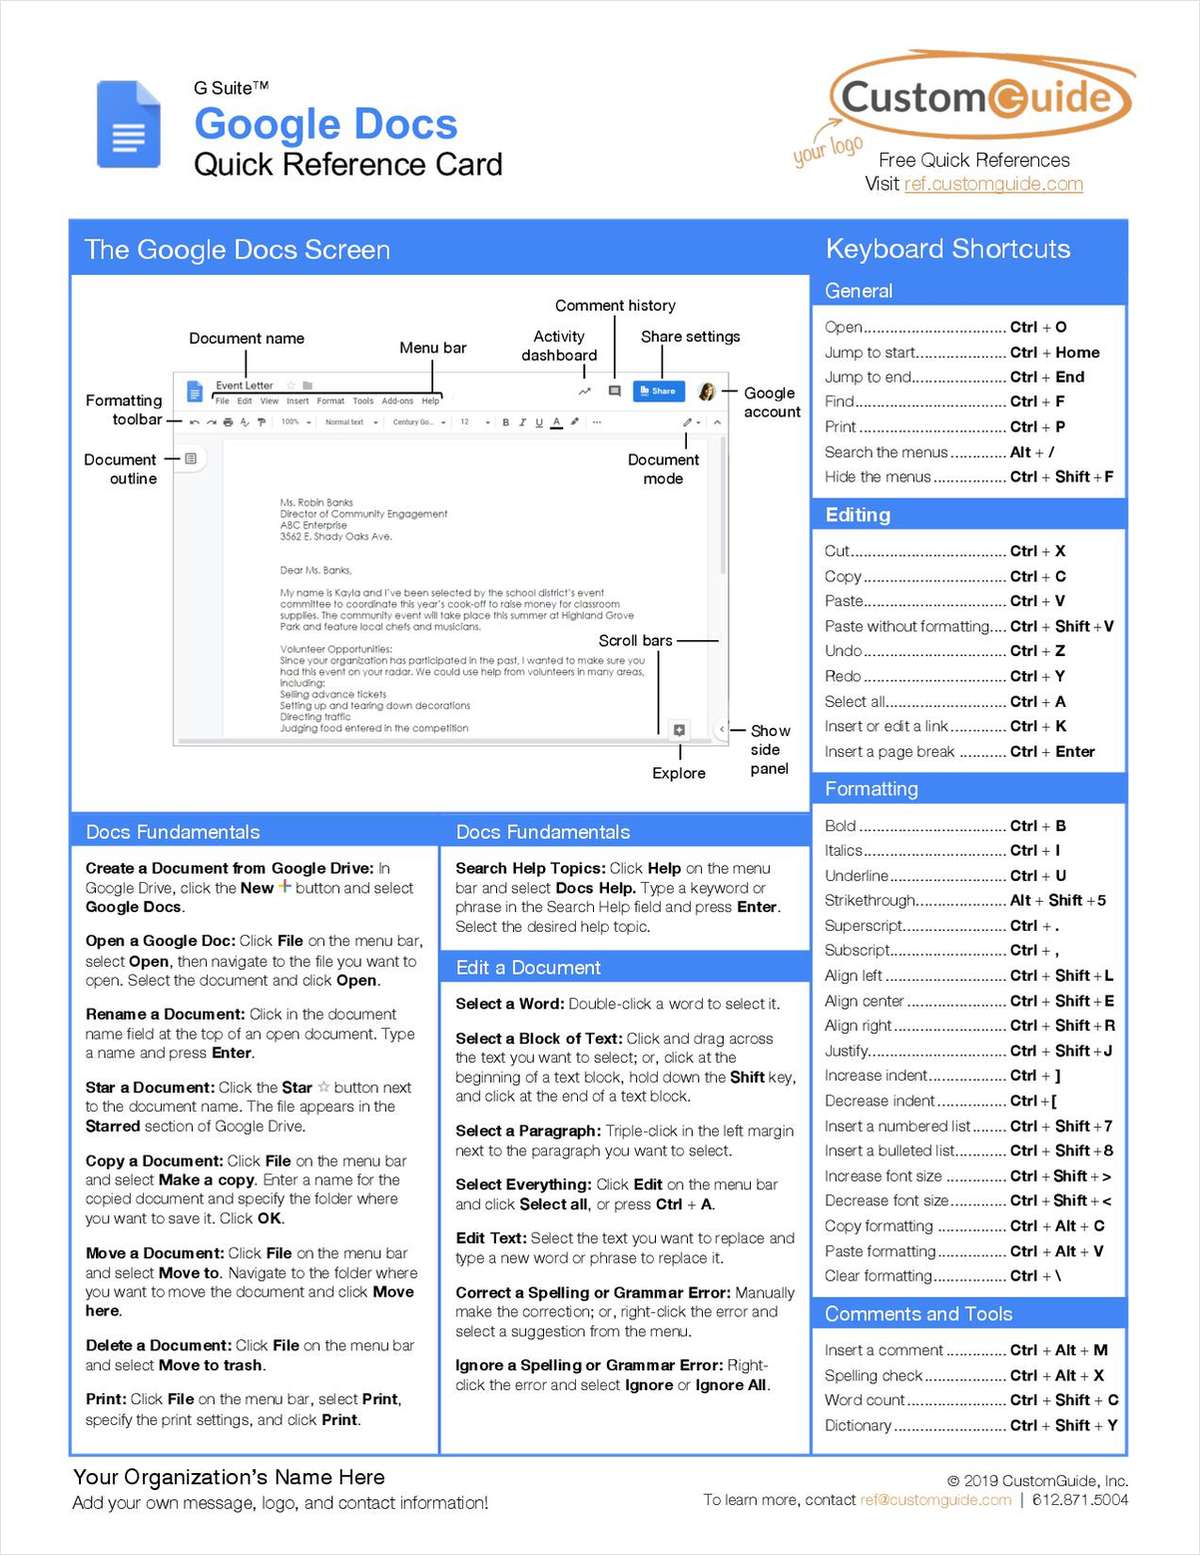 Google Docs Quick Reference Guide, Free CustomGuide Tips and Tricks Guide